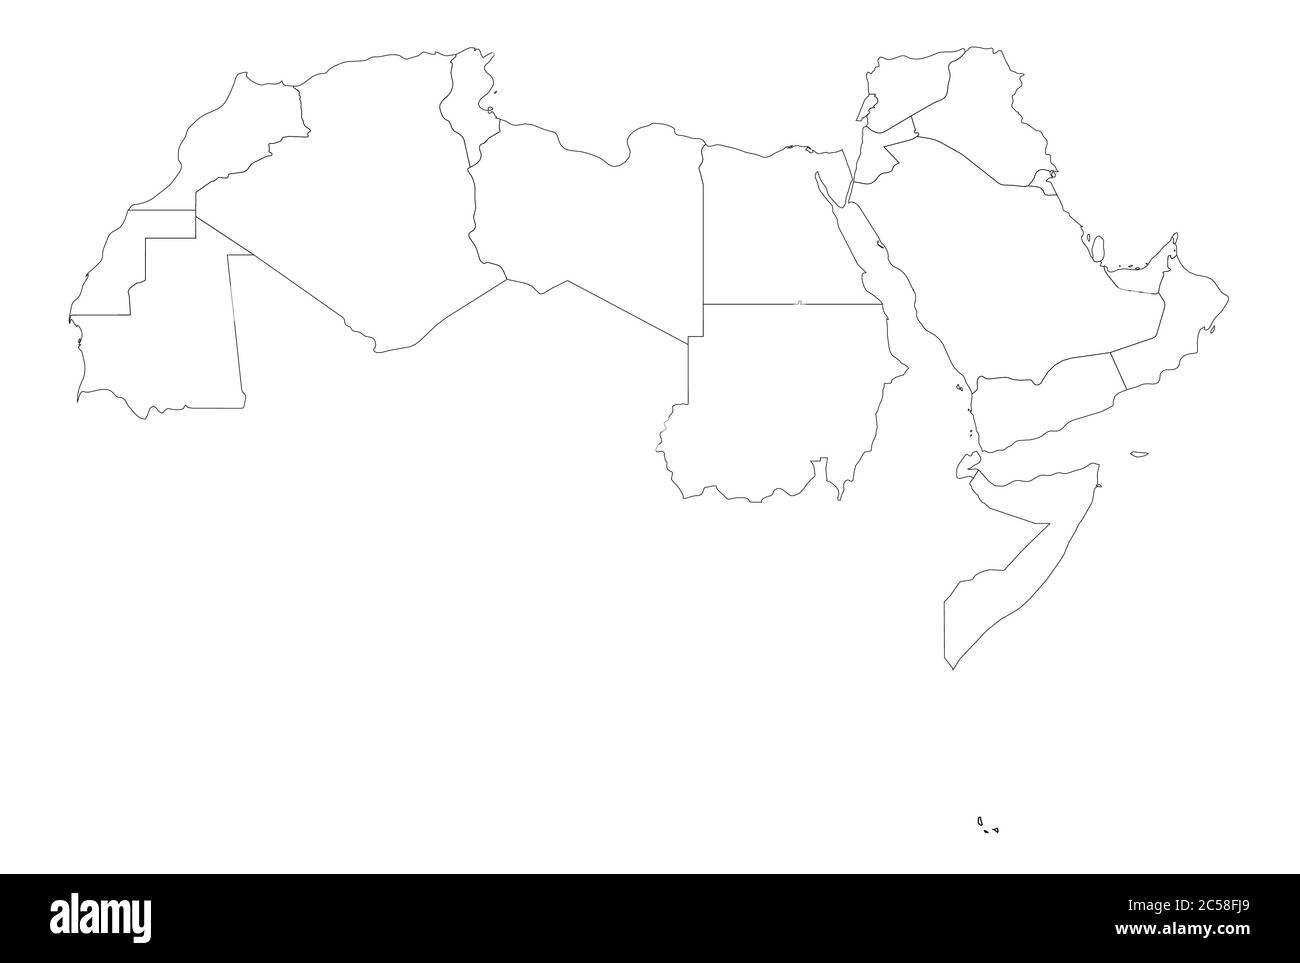 Arab World states political map. 22 arabic-speaking countries of the Arab League. Northern Africa and Middle East region. Vector illustration. Stock Vector